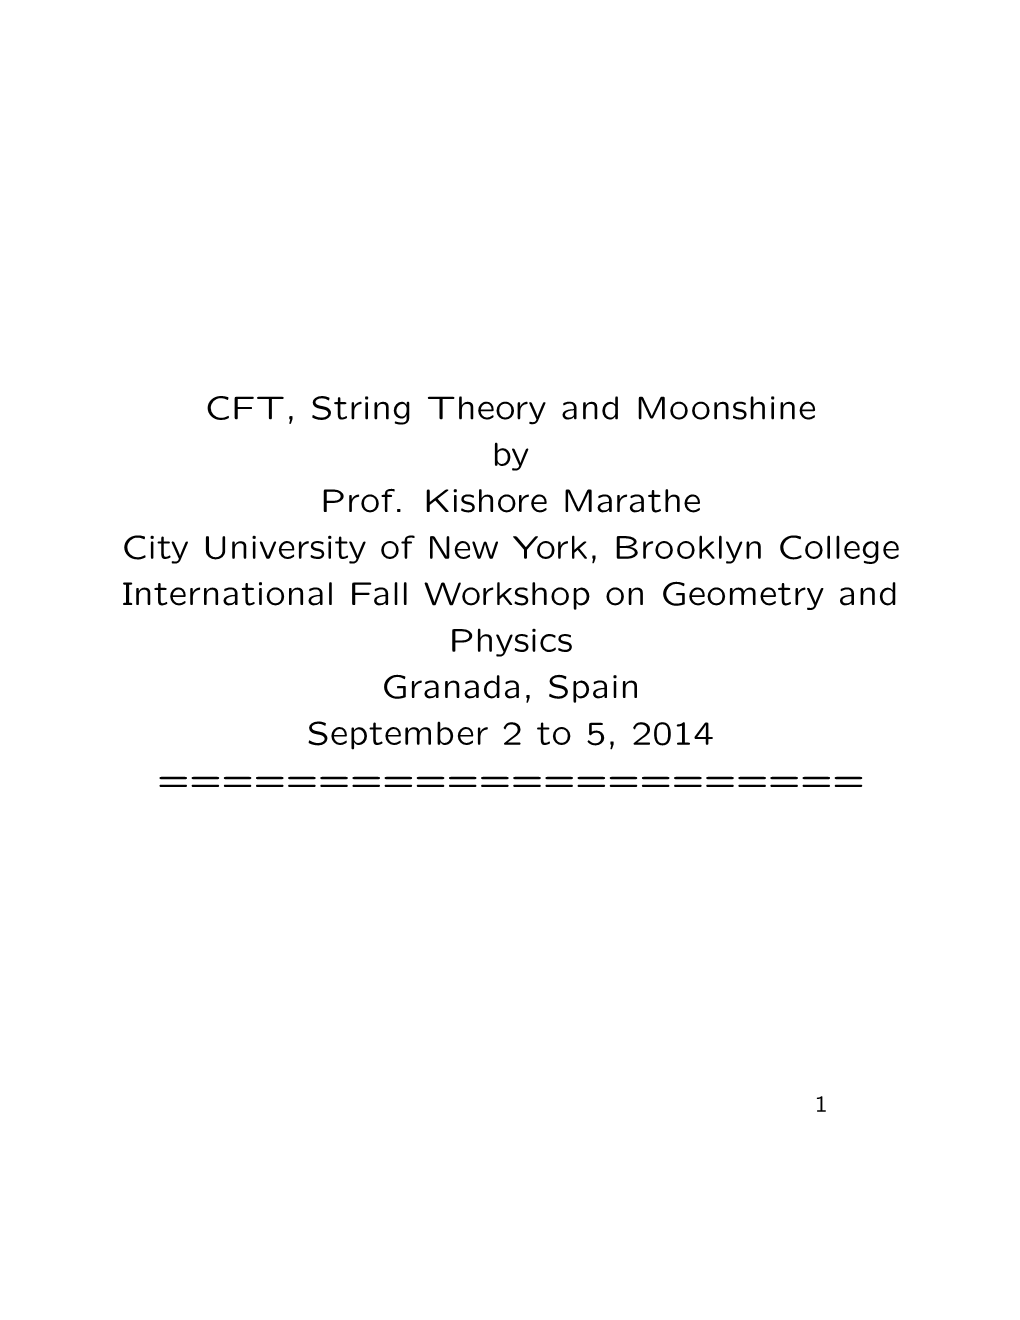 CFT, String Theory and Moonshine by Prof. Kishore Marathe City